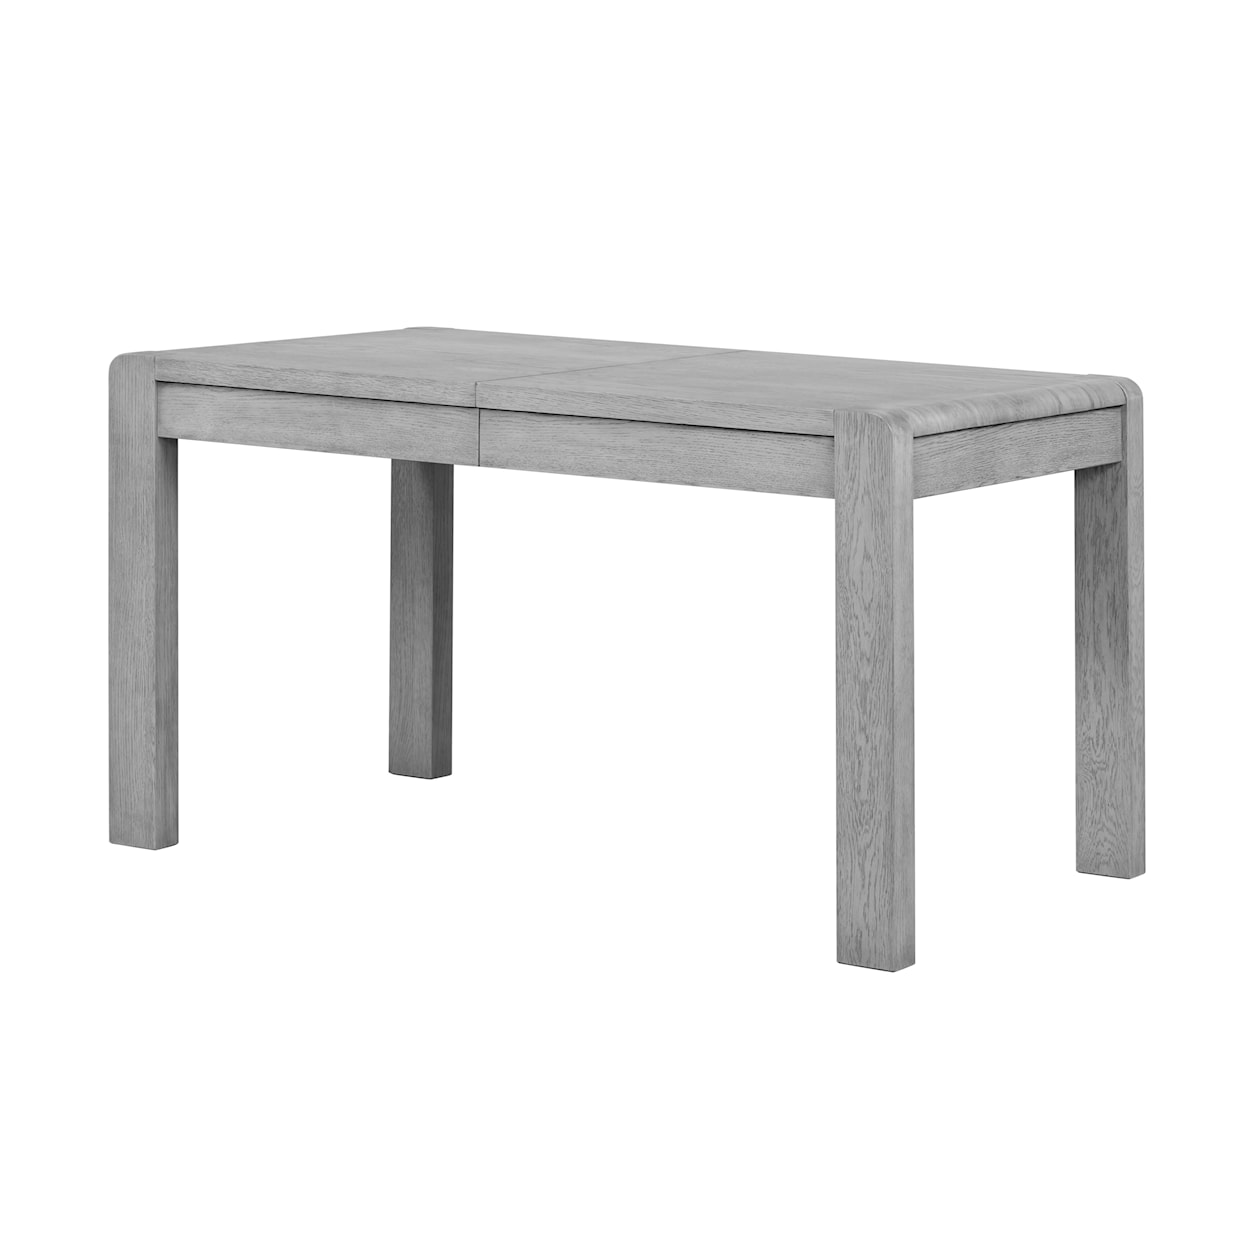 Global Home Amsterdam Compact Extension Dining Table